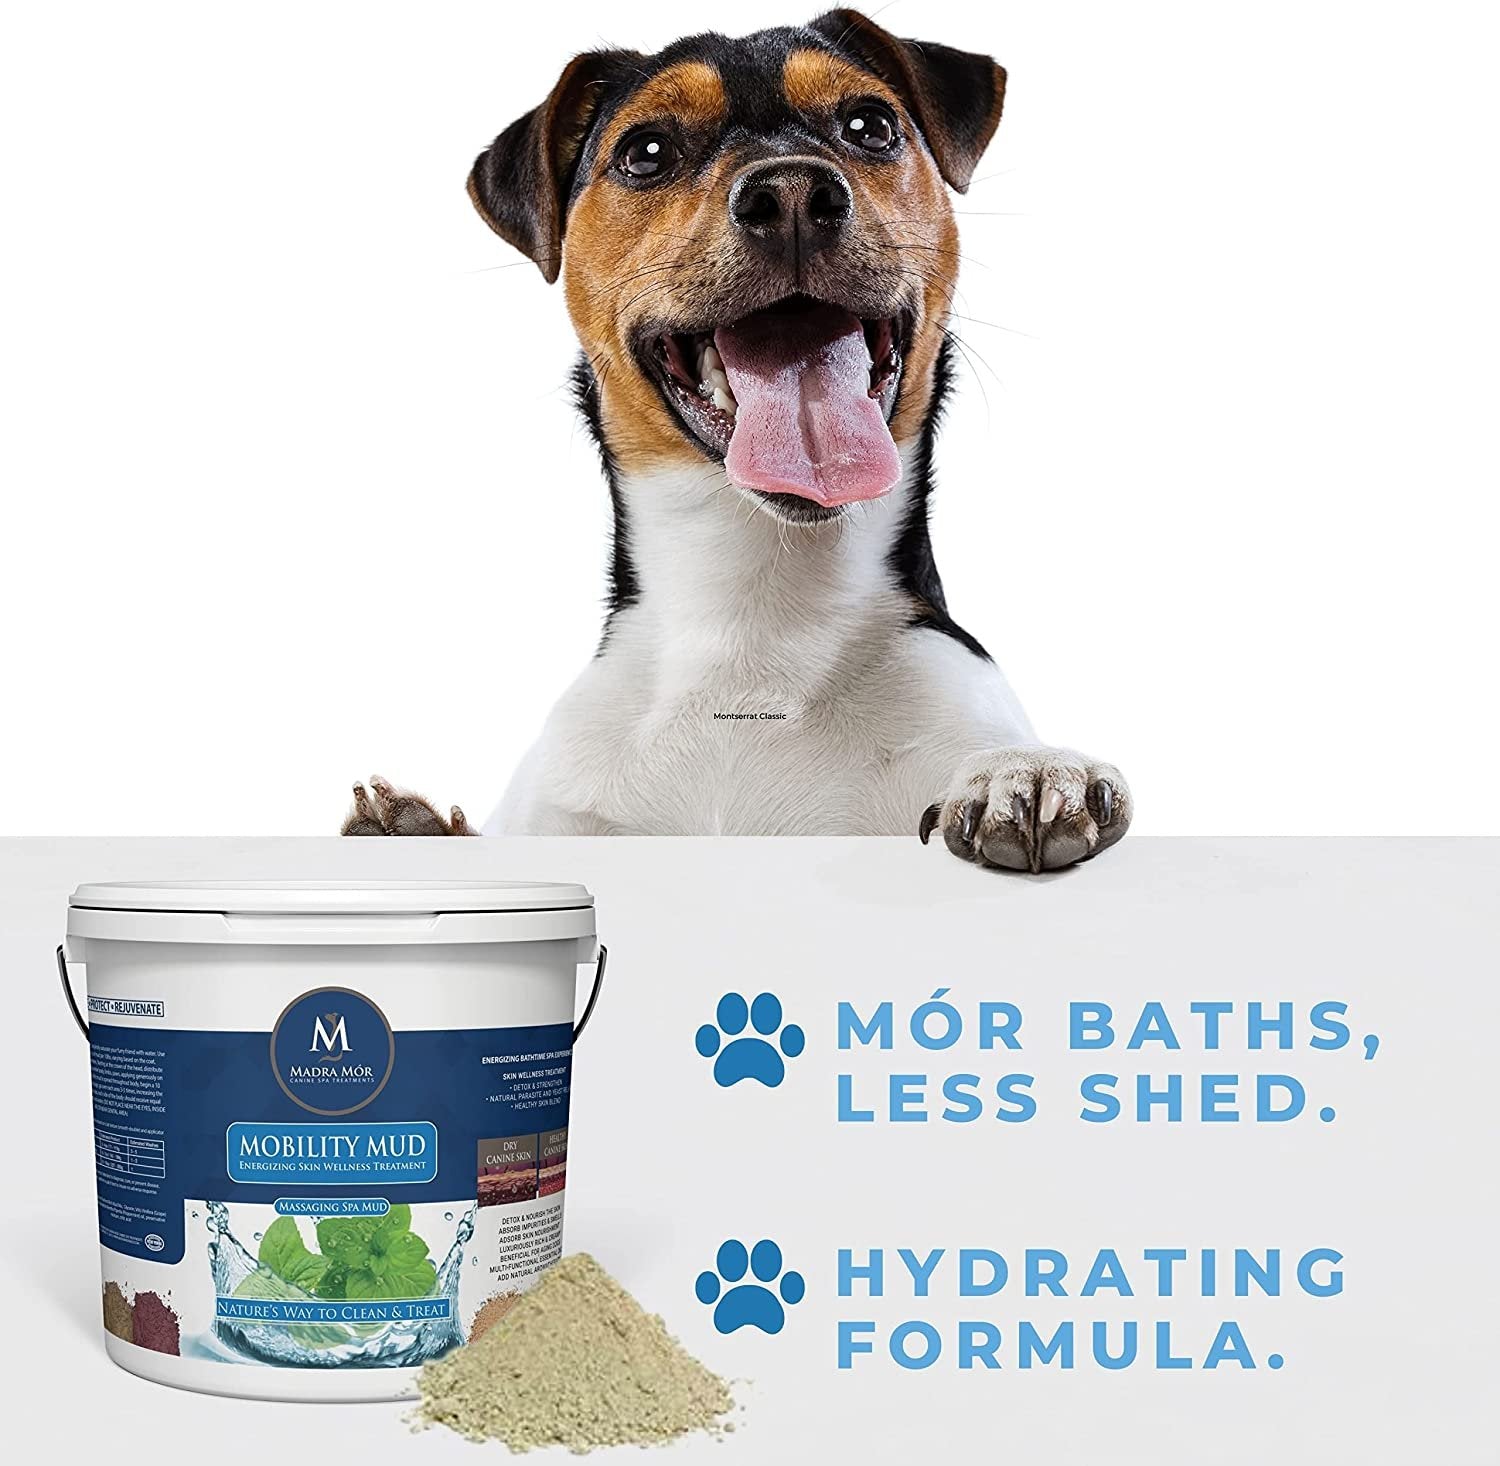 Madra Mor Massaging SPA Mud - Luxurious Dog Skin Wellness Treatment - Cleanse - Protect - Rejuvenate - Mobility Mud - 1 Pail (7.5lb) - with Multi-Purpose Key Chain